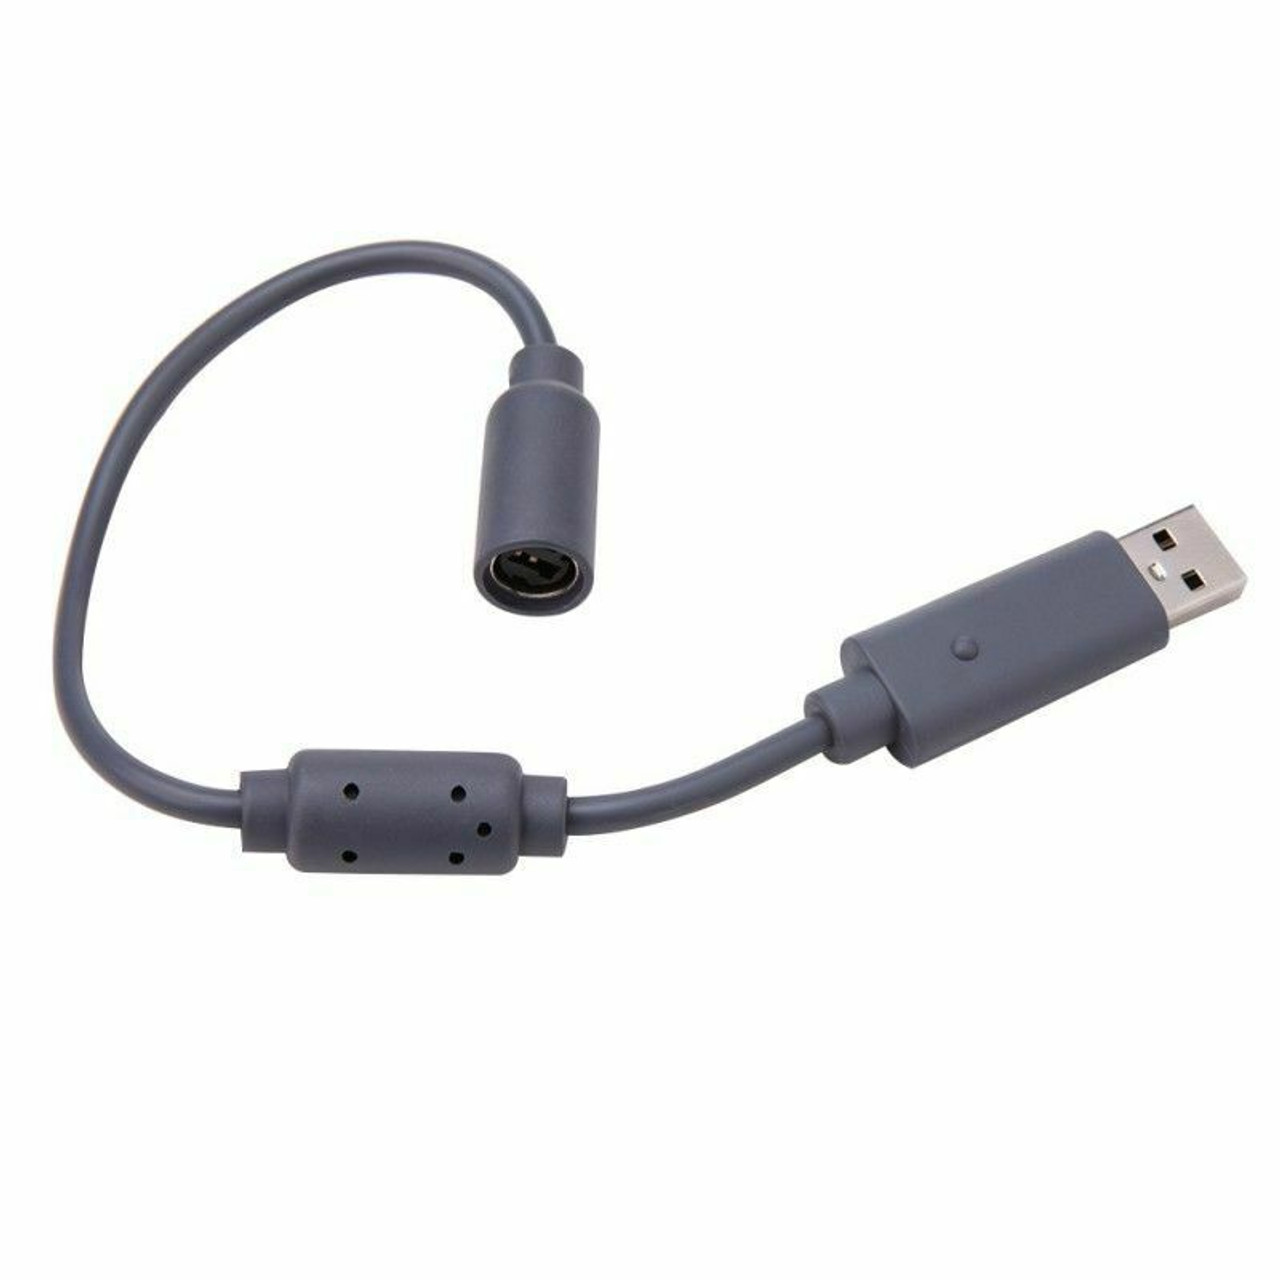 Usb Breakaway Dongle Cable Cord Adapter For Xbox 360 Pc Wired Controller Usa The Perfect Part Inc